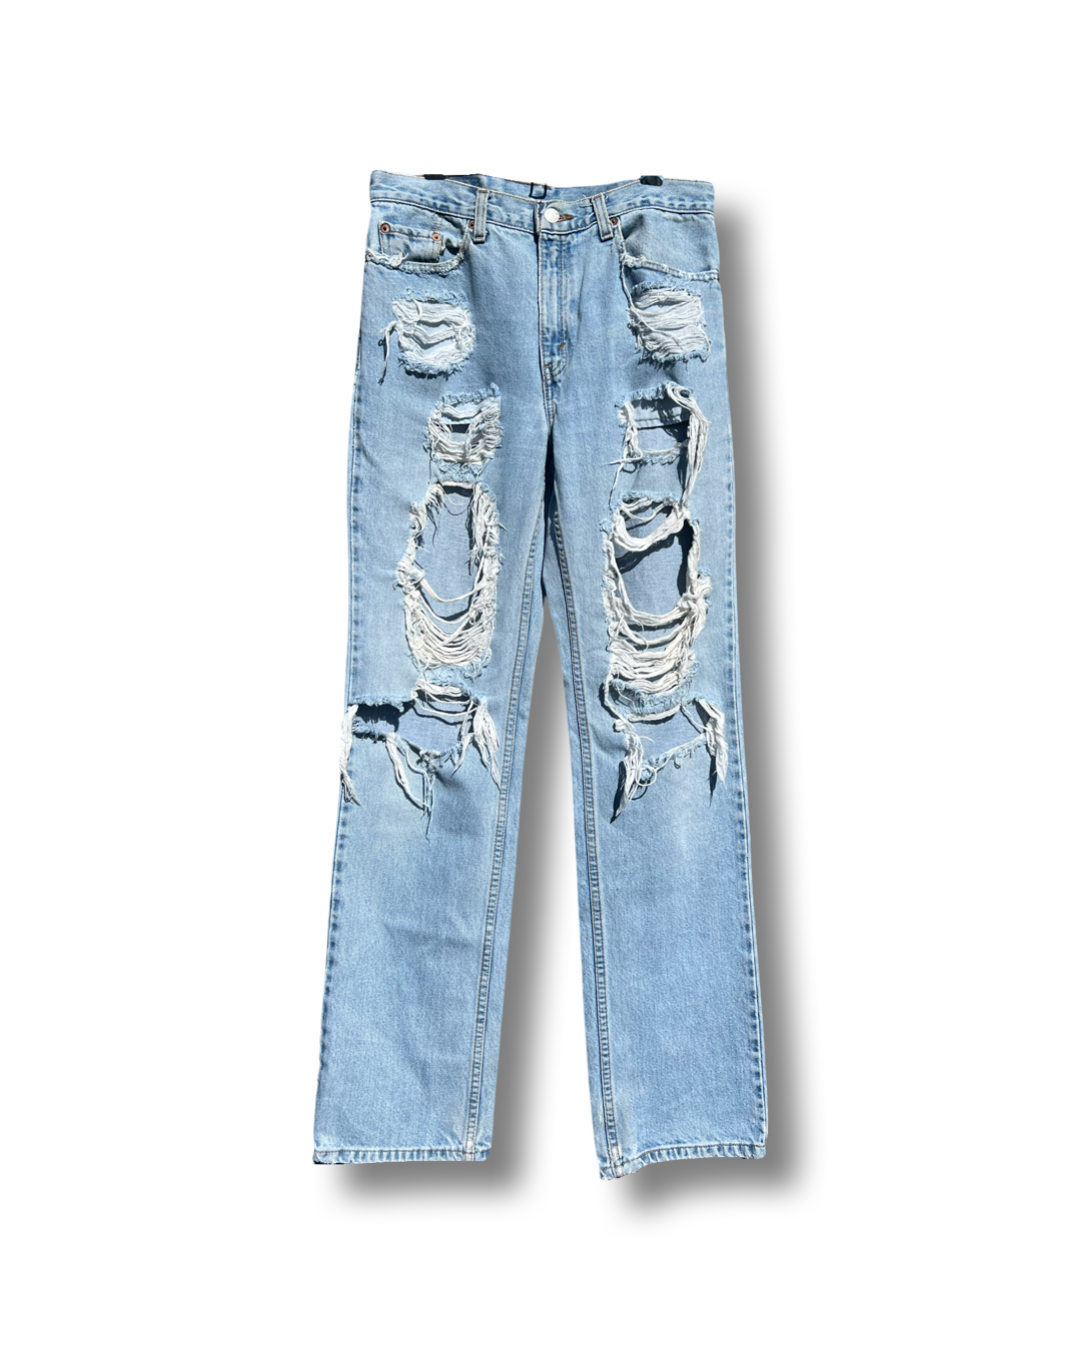 Baggy Distressed Levi's – Blessing In Disguise444